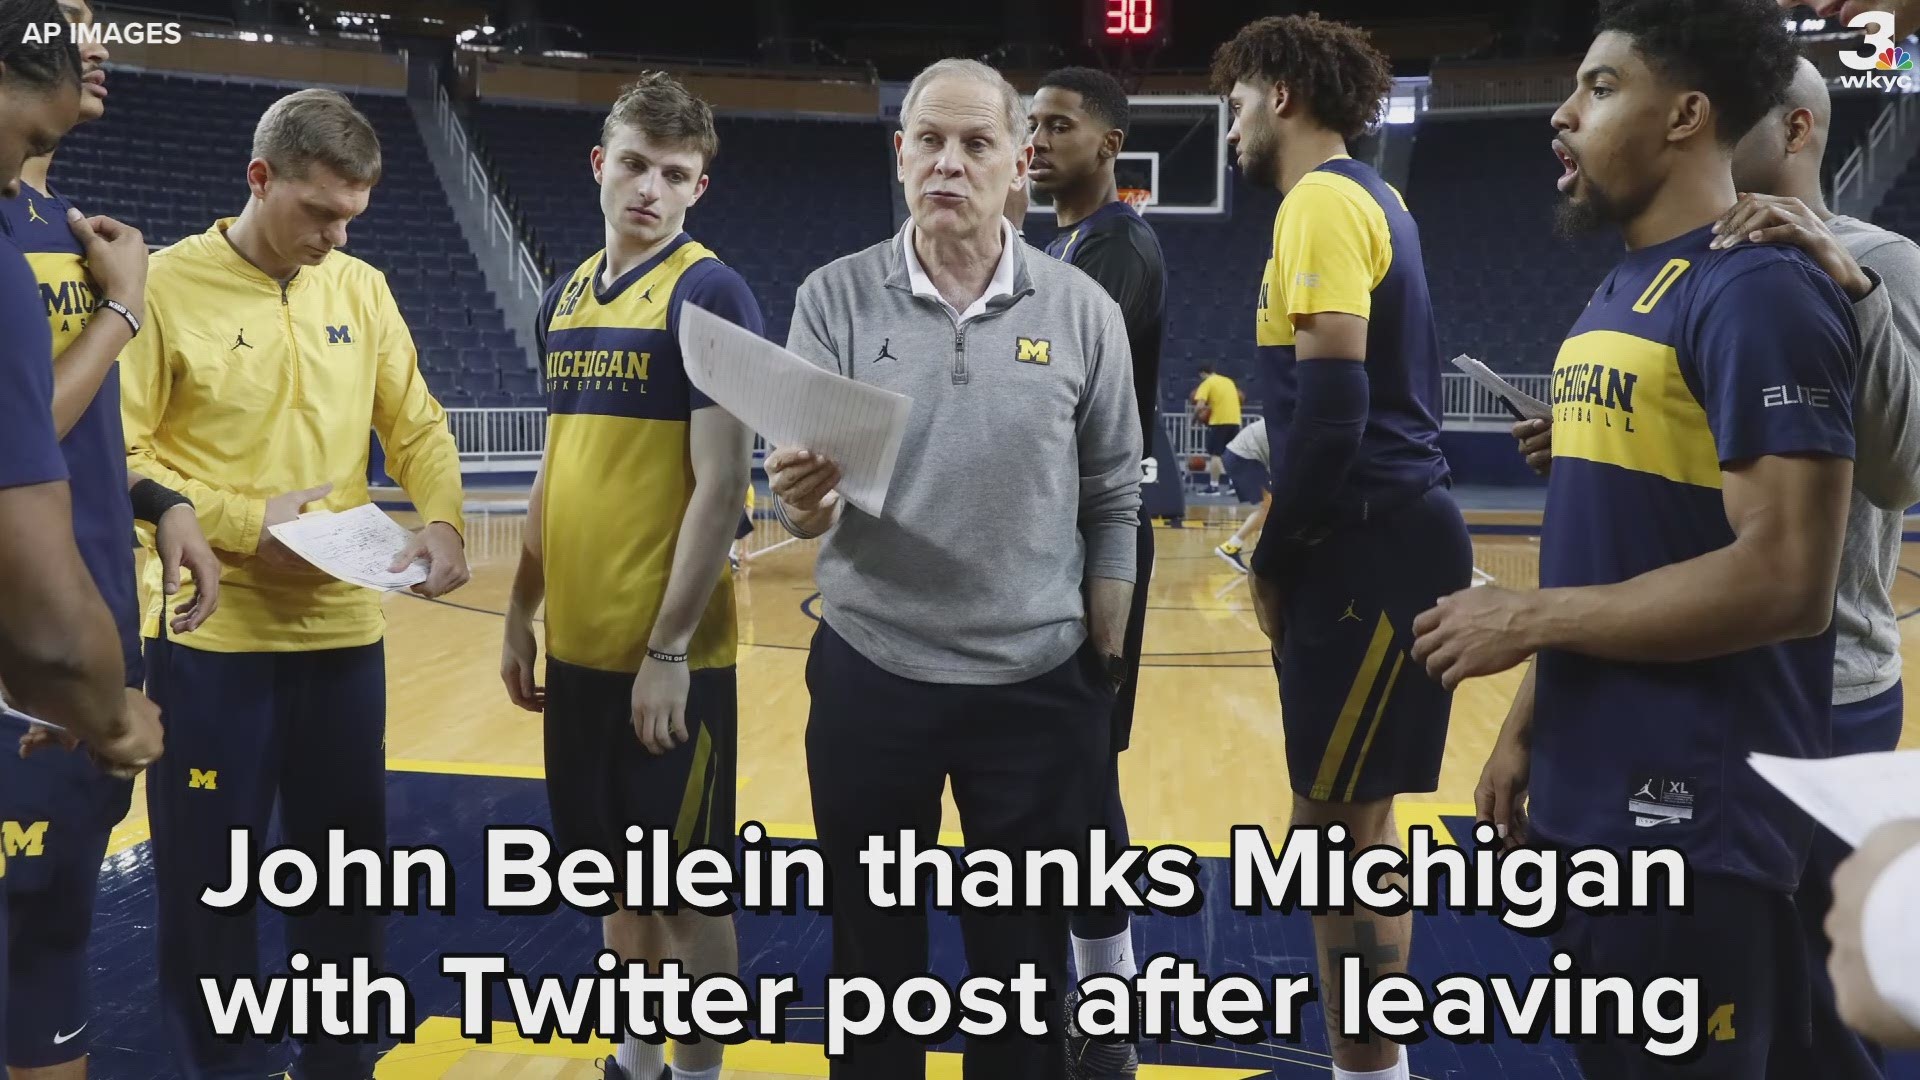 New Cleveland Cavaliers coach John Beilein thanked the University of Michigan for their support in his 12 years with the program.